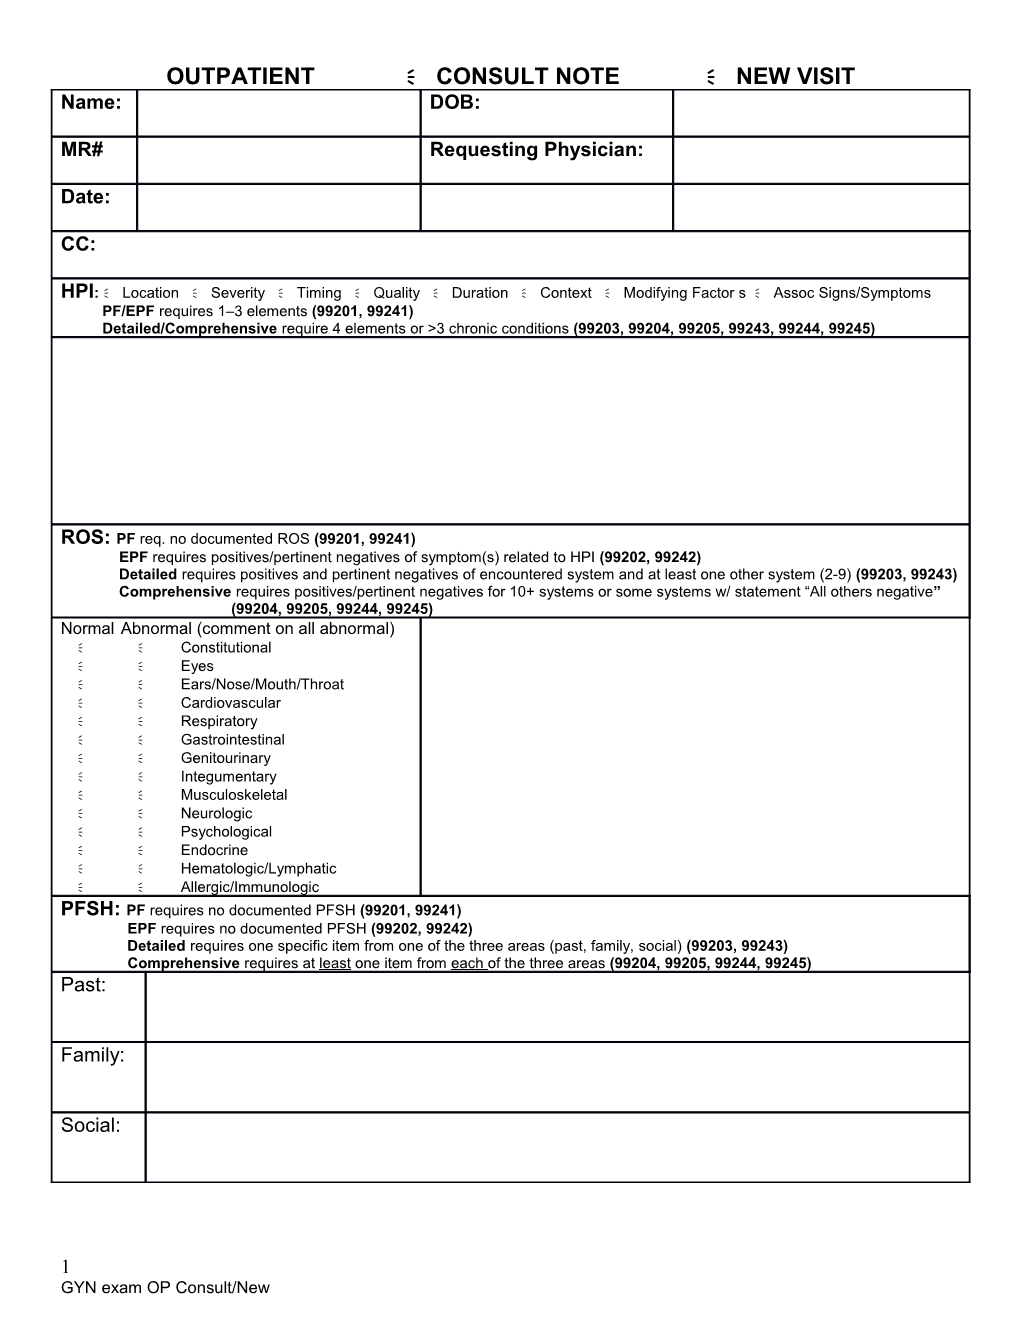 Outpatient Documentation Form Consult Or New(2)